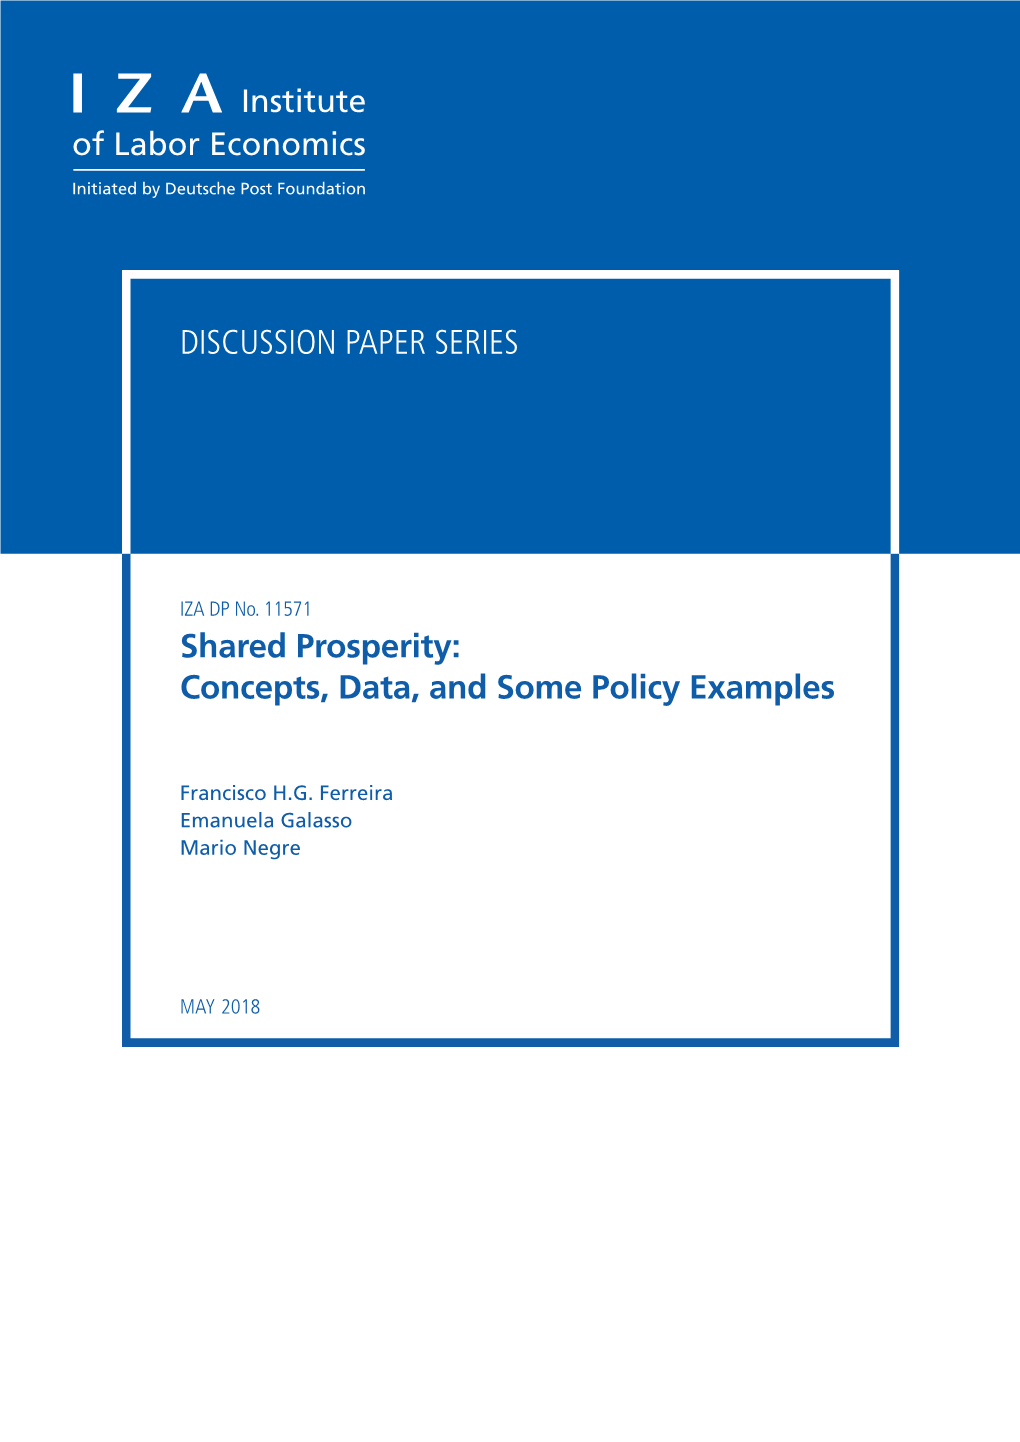 Shared Prosperity: Concepts, Data, and Some Policy Examples